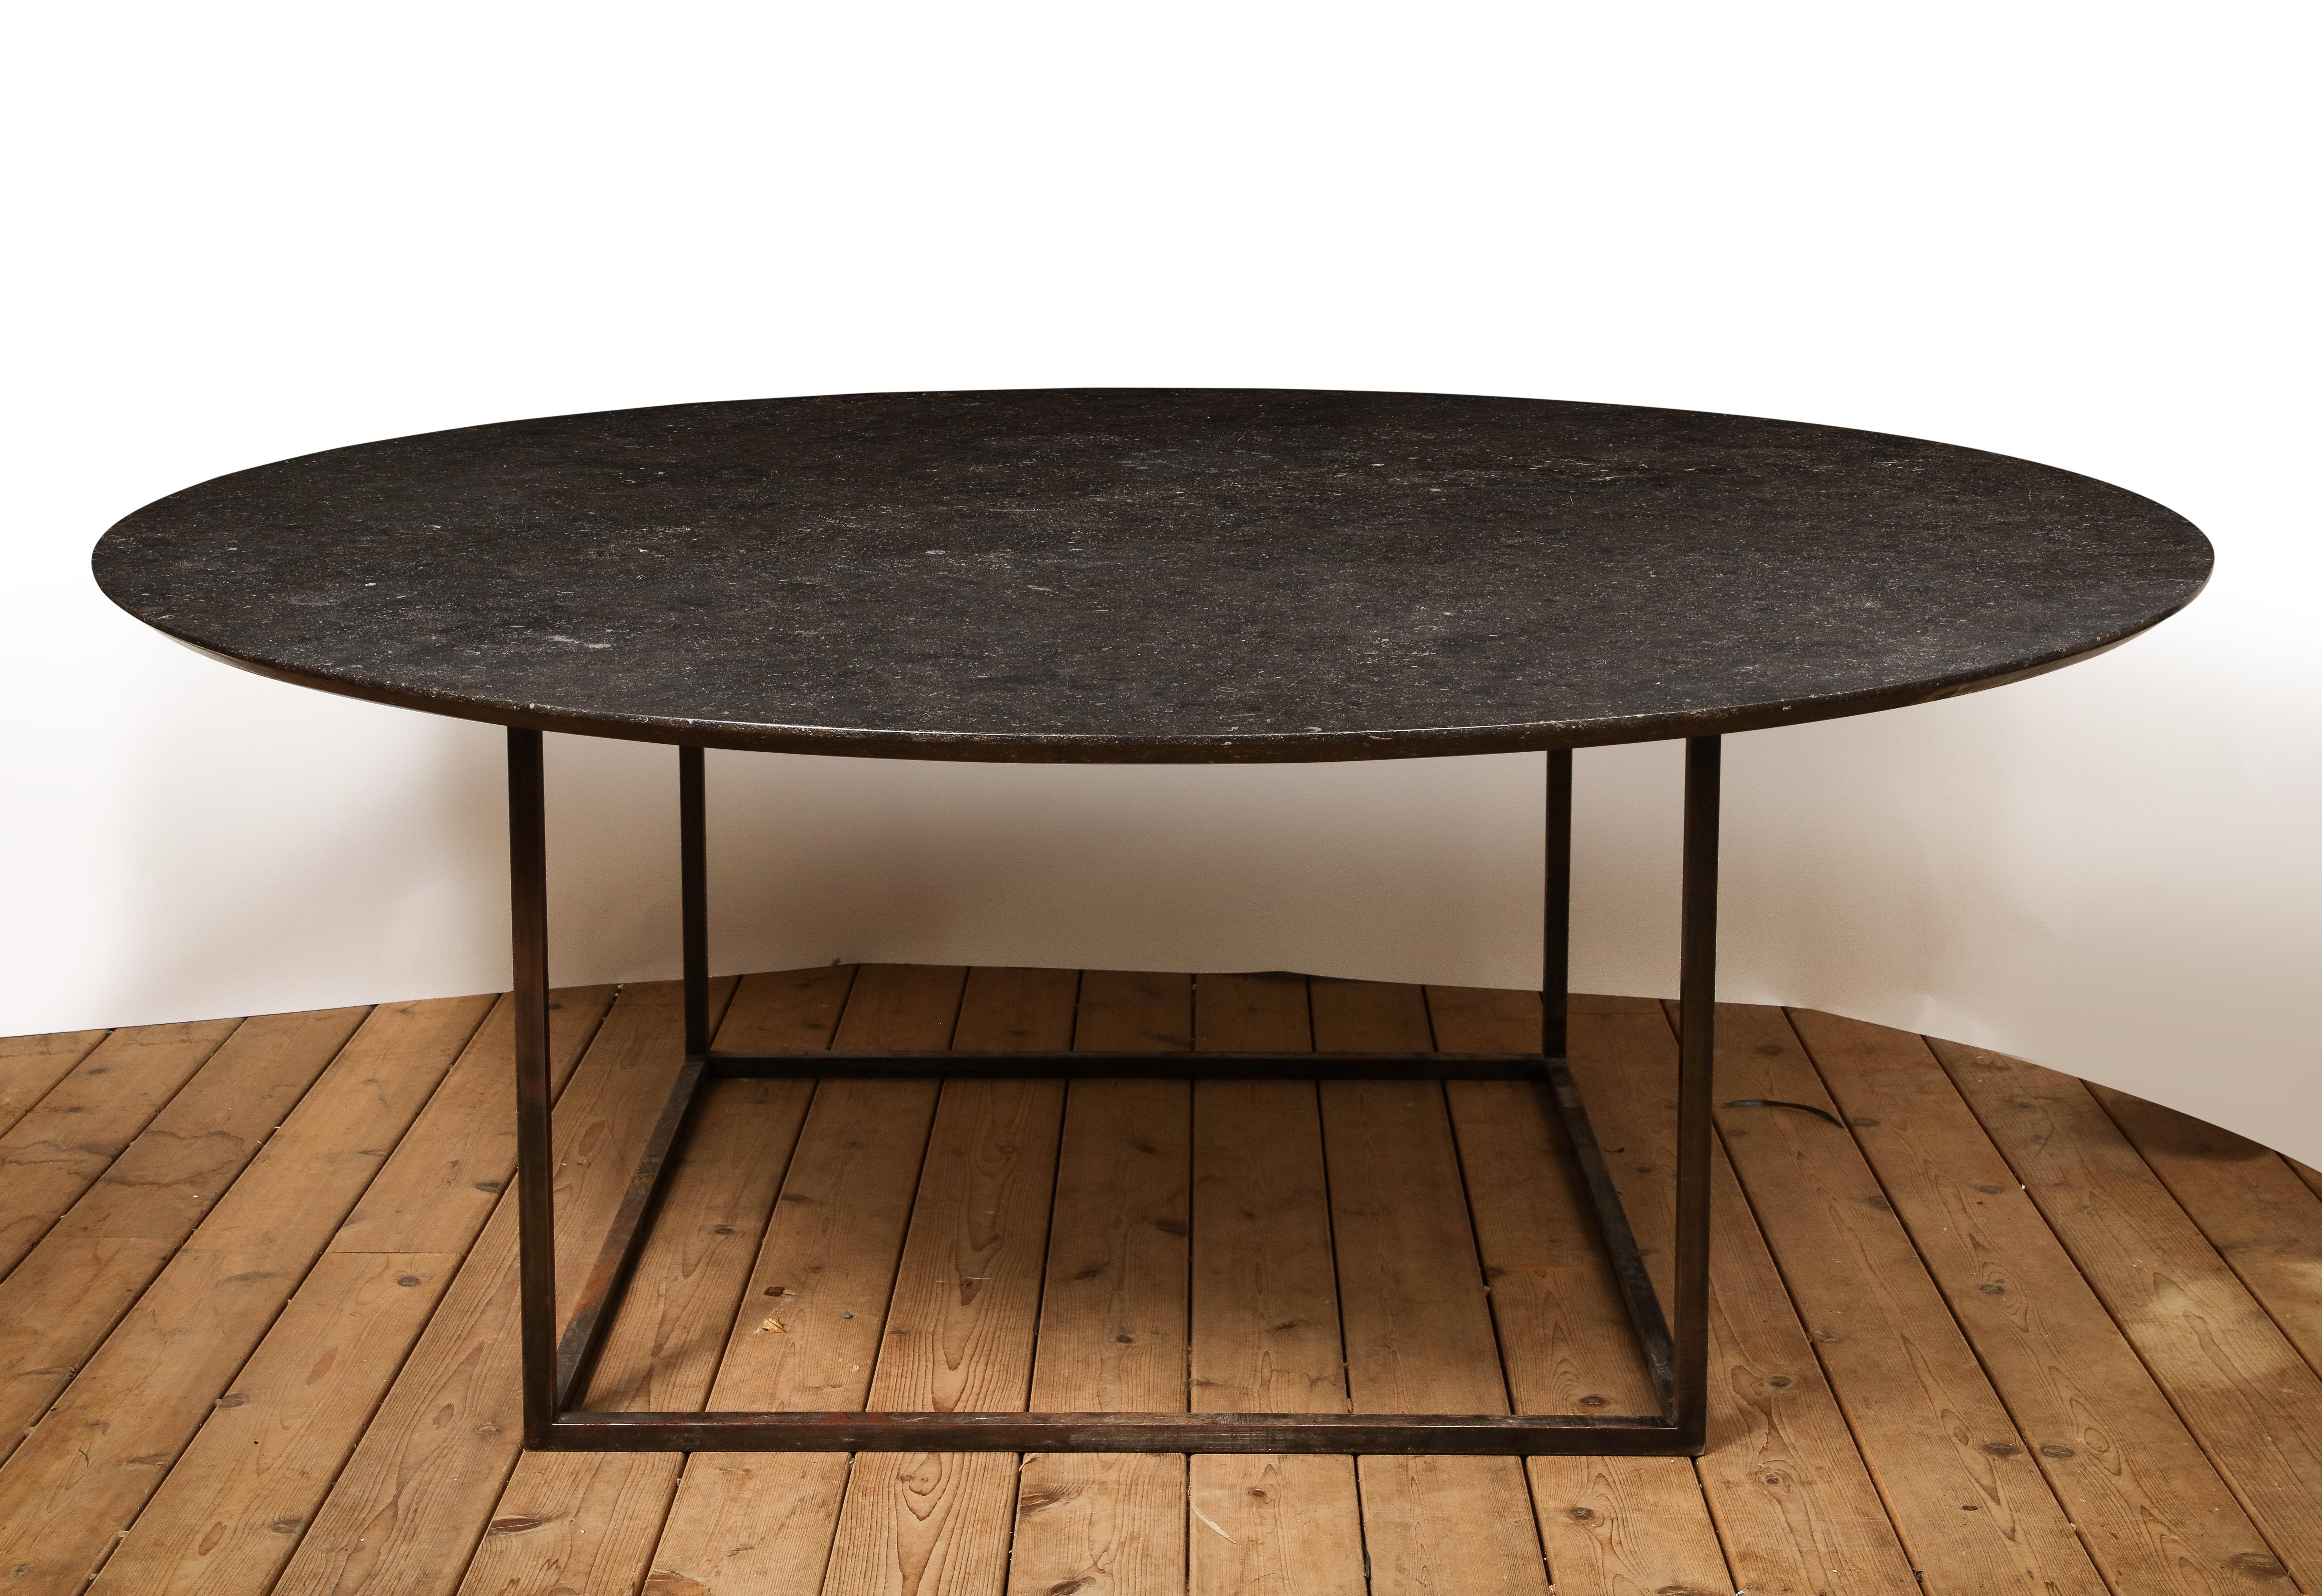 20th century French dining table with black stone round top on a custom square steel base. Clean, simple lines and large scale. 